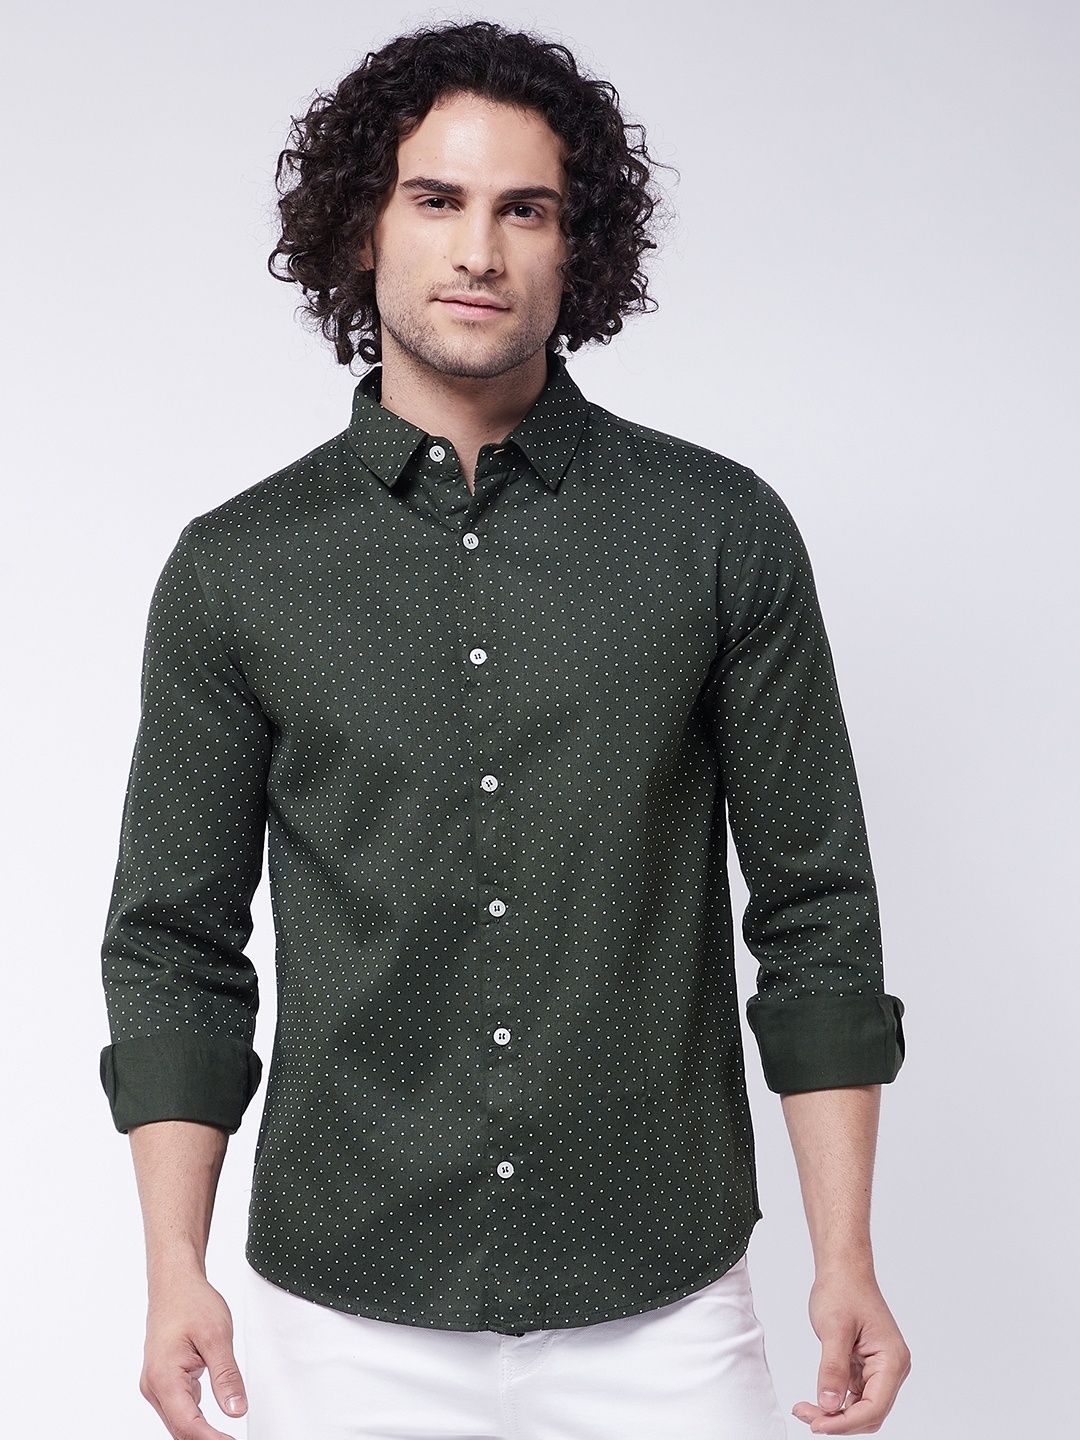 Rick Masch Men's Slim Fit Fine Cotton Printed Full Sleeves Casual Shirt